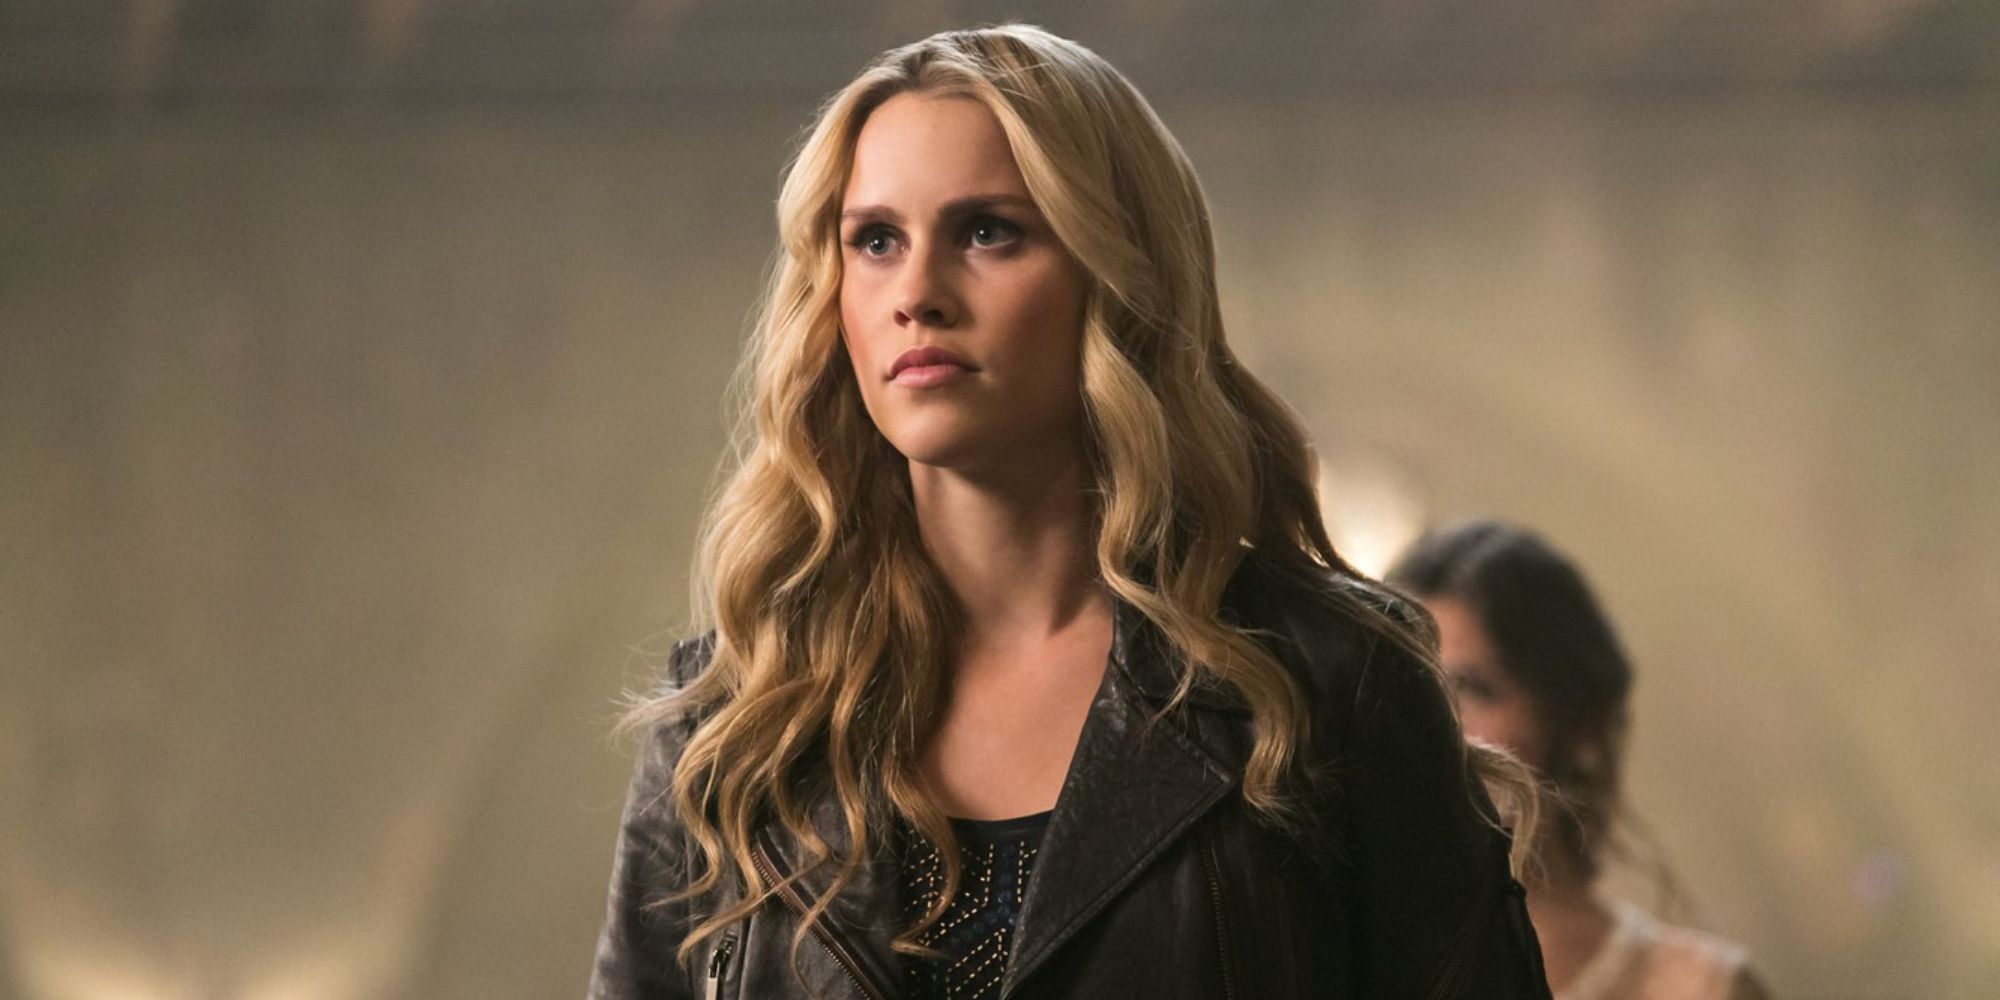 Claire Holt as Rebekah Mikaelson looking intently off-camera in The Vampire Diaries